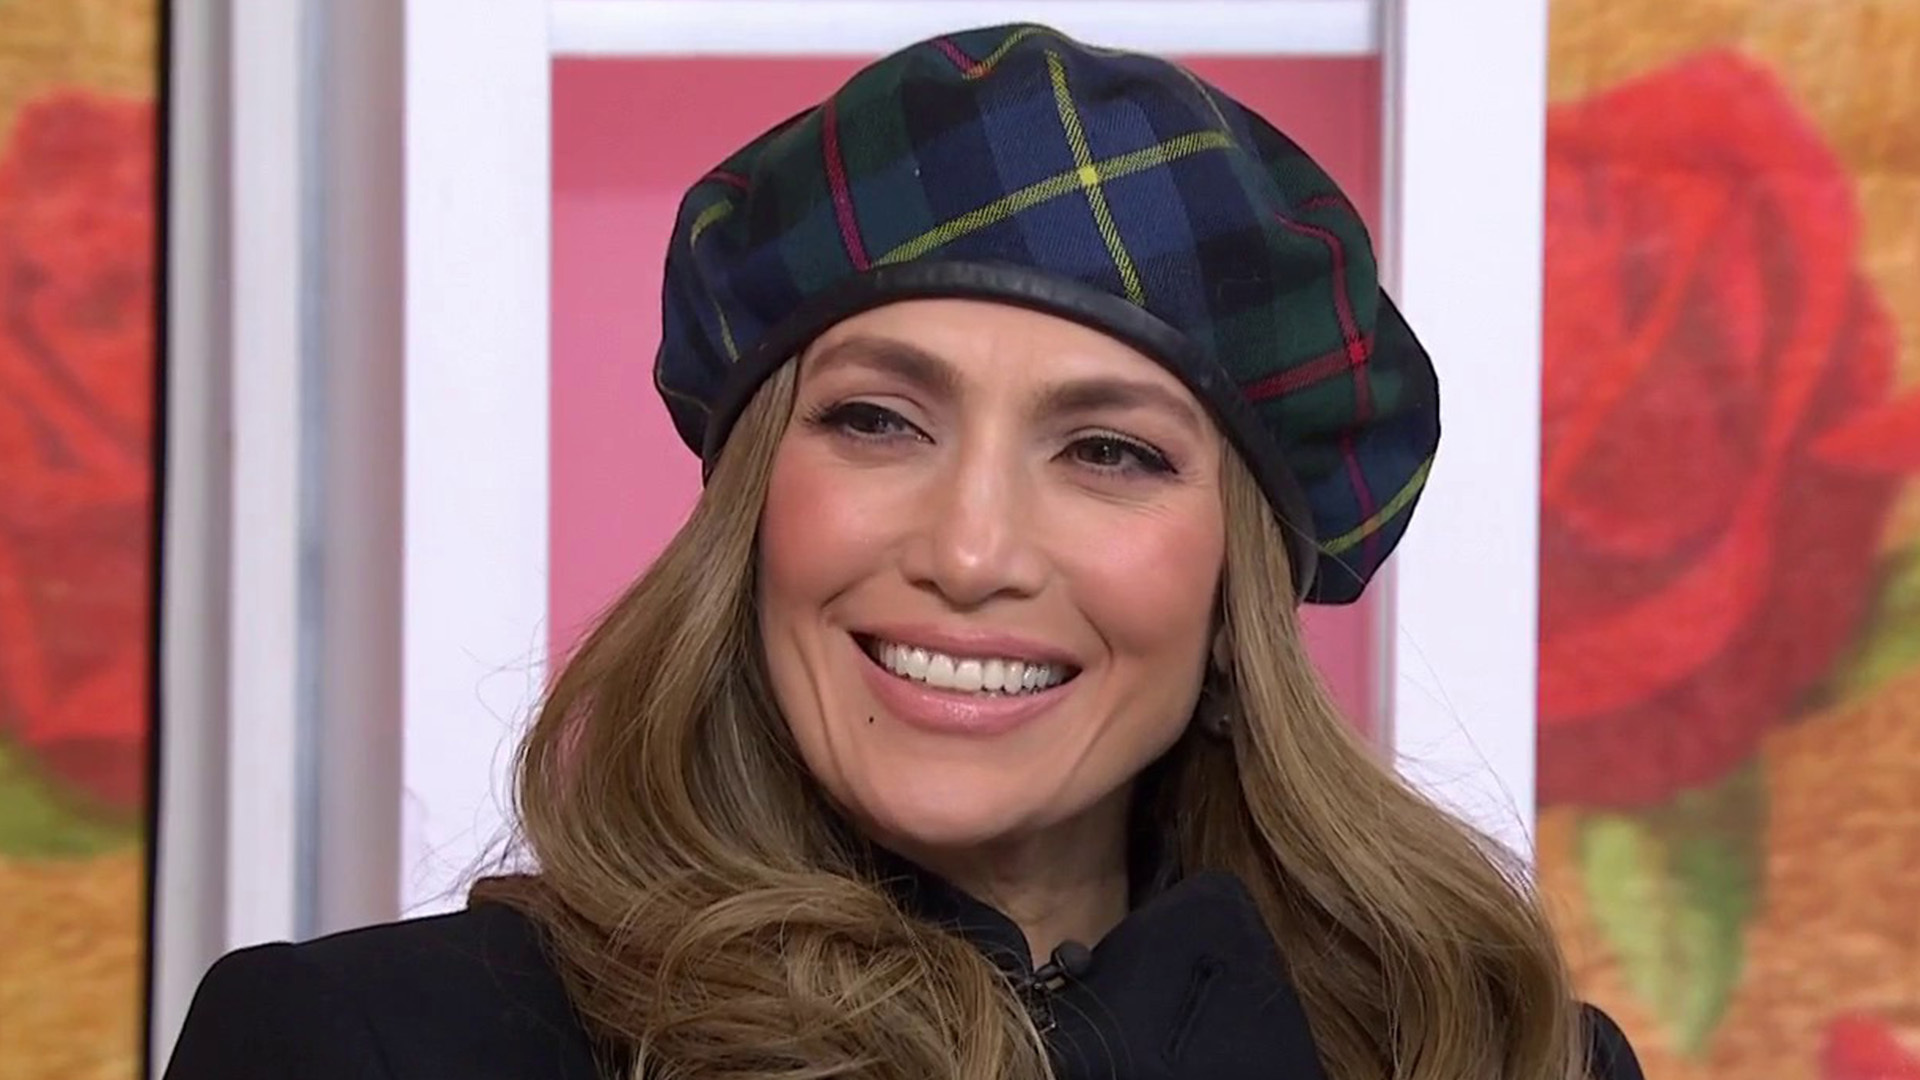 Jennifer Lopez, 53, has been named the new face of Italian